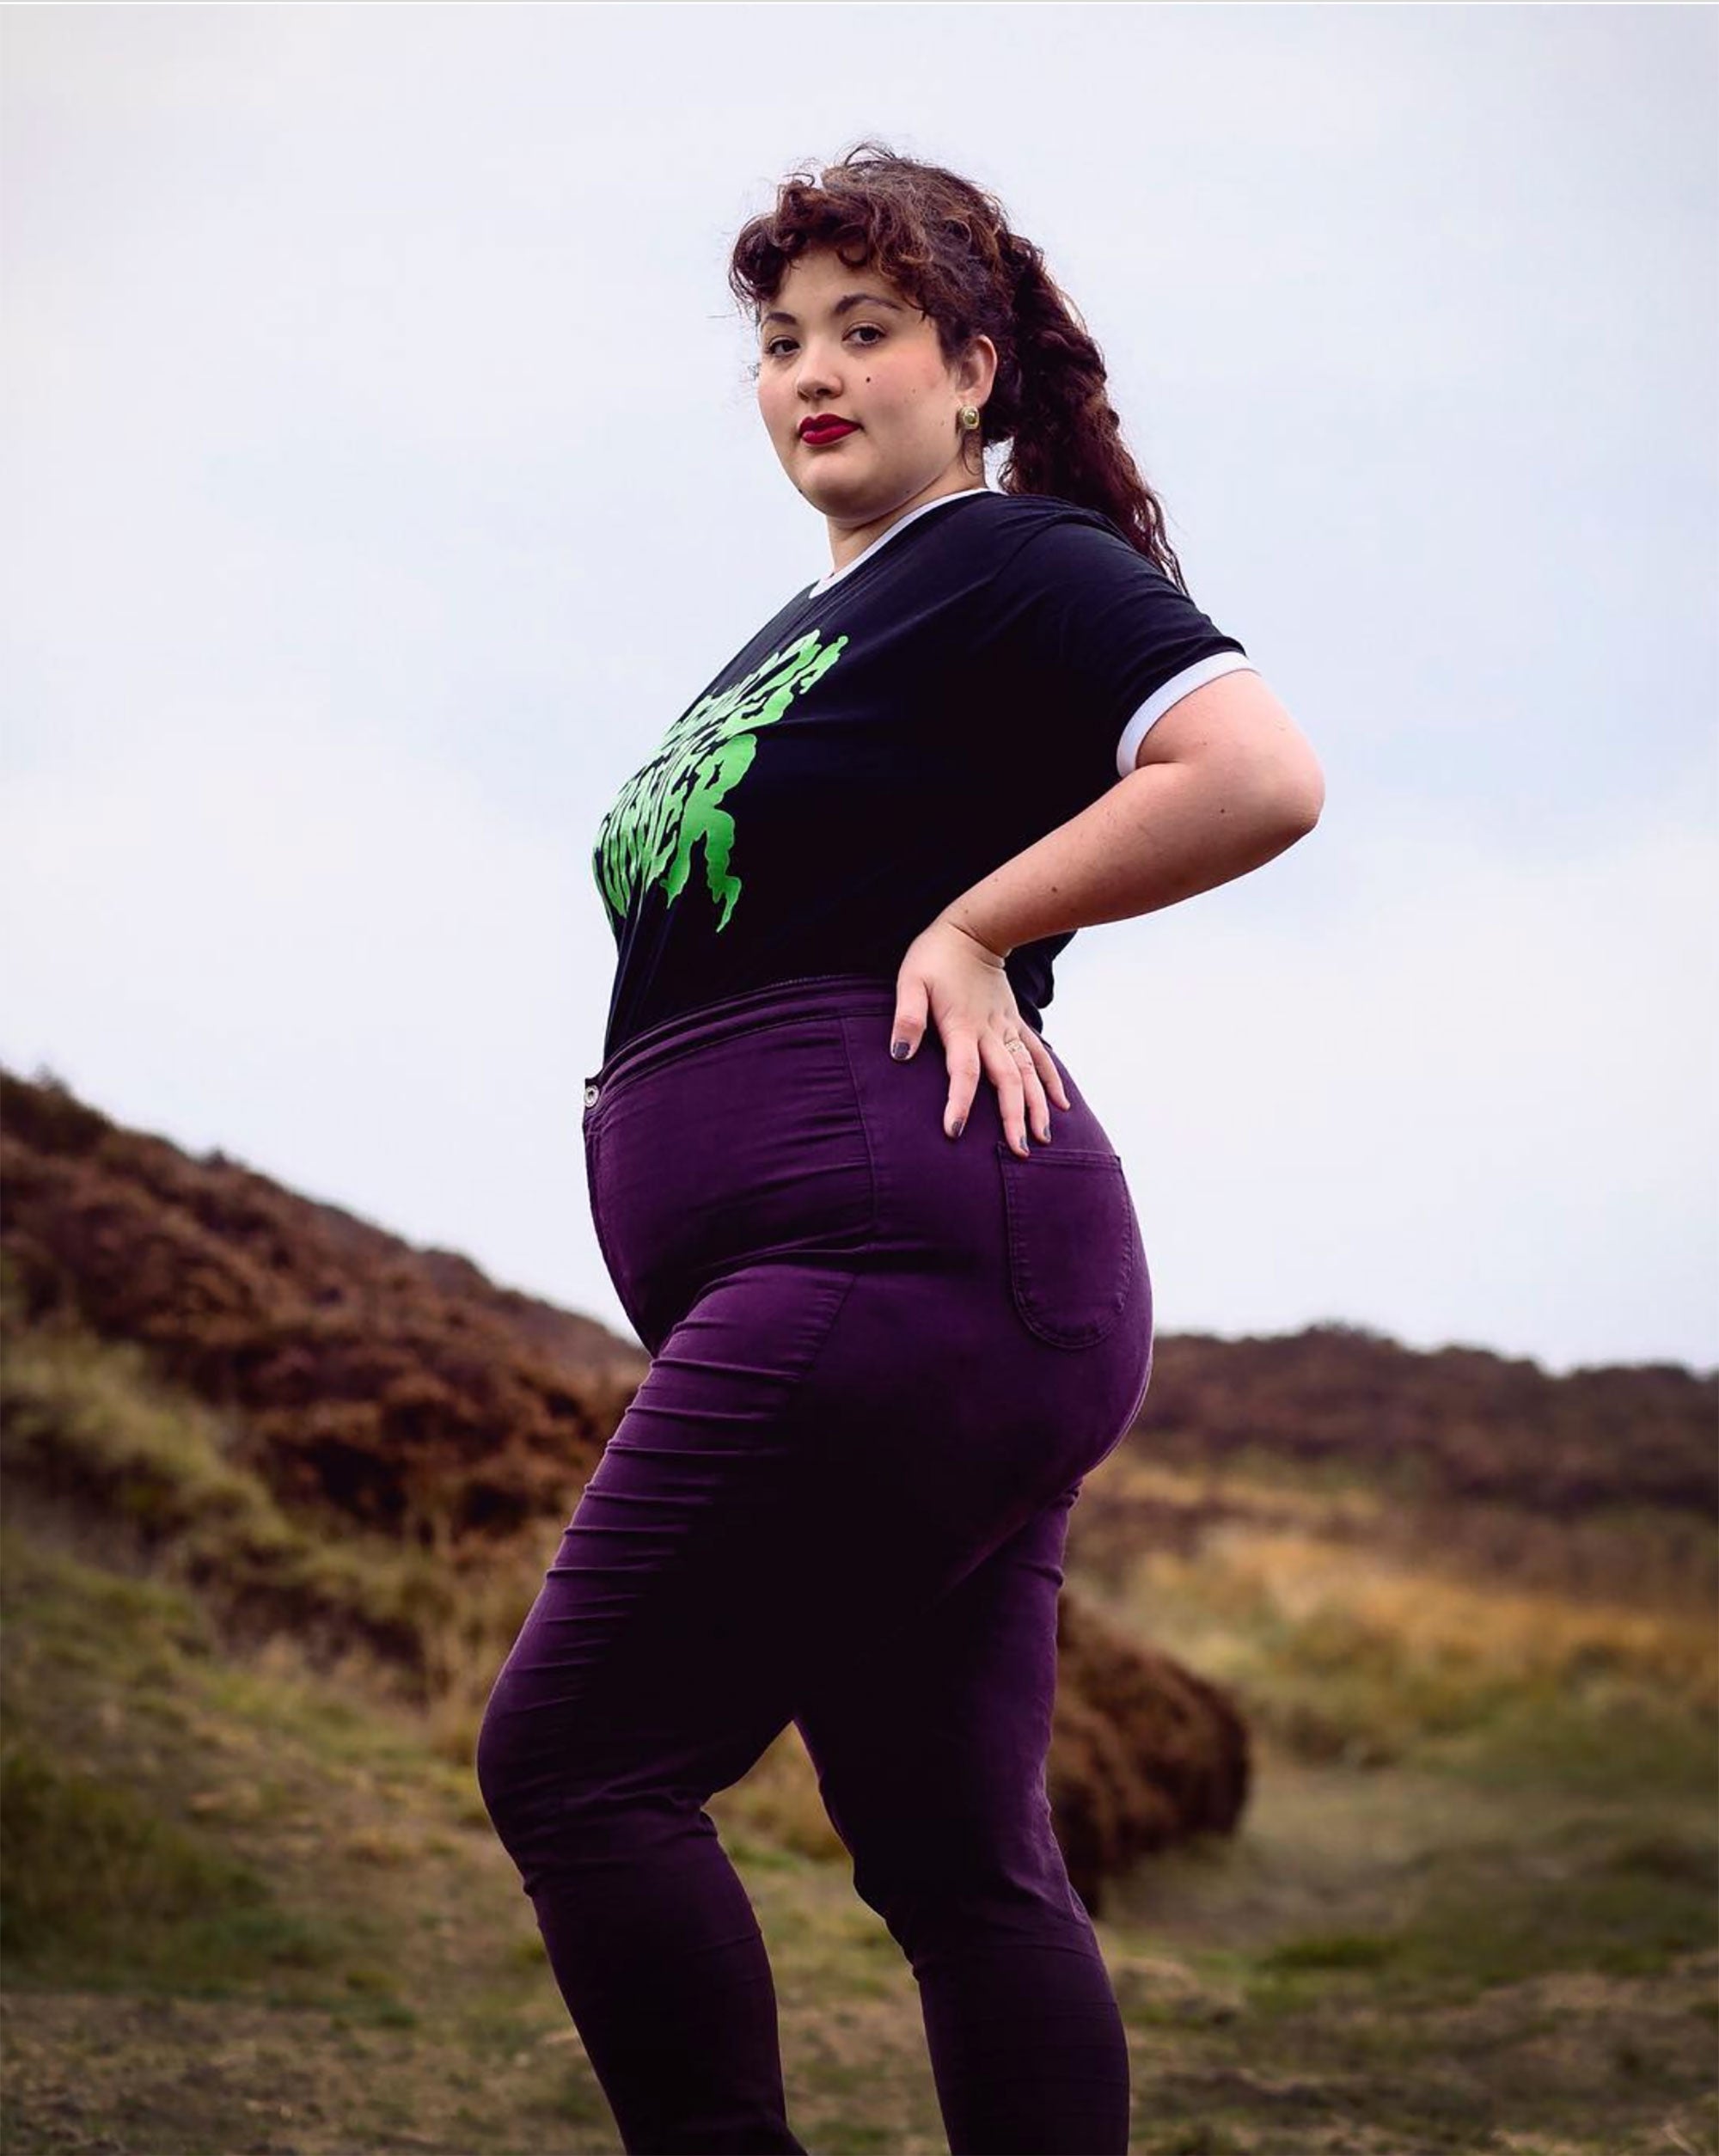 Plus-Size Women On The 'Death' Of Skinny Jeans in 2021